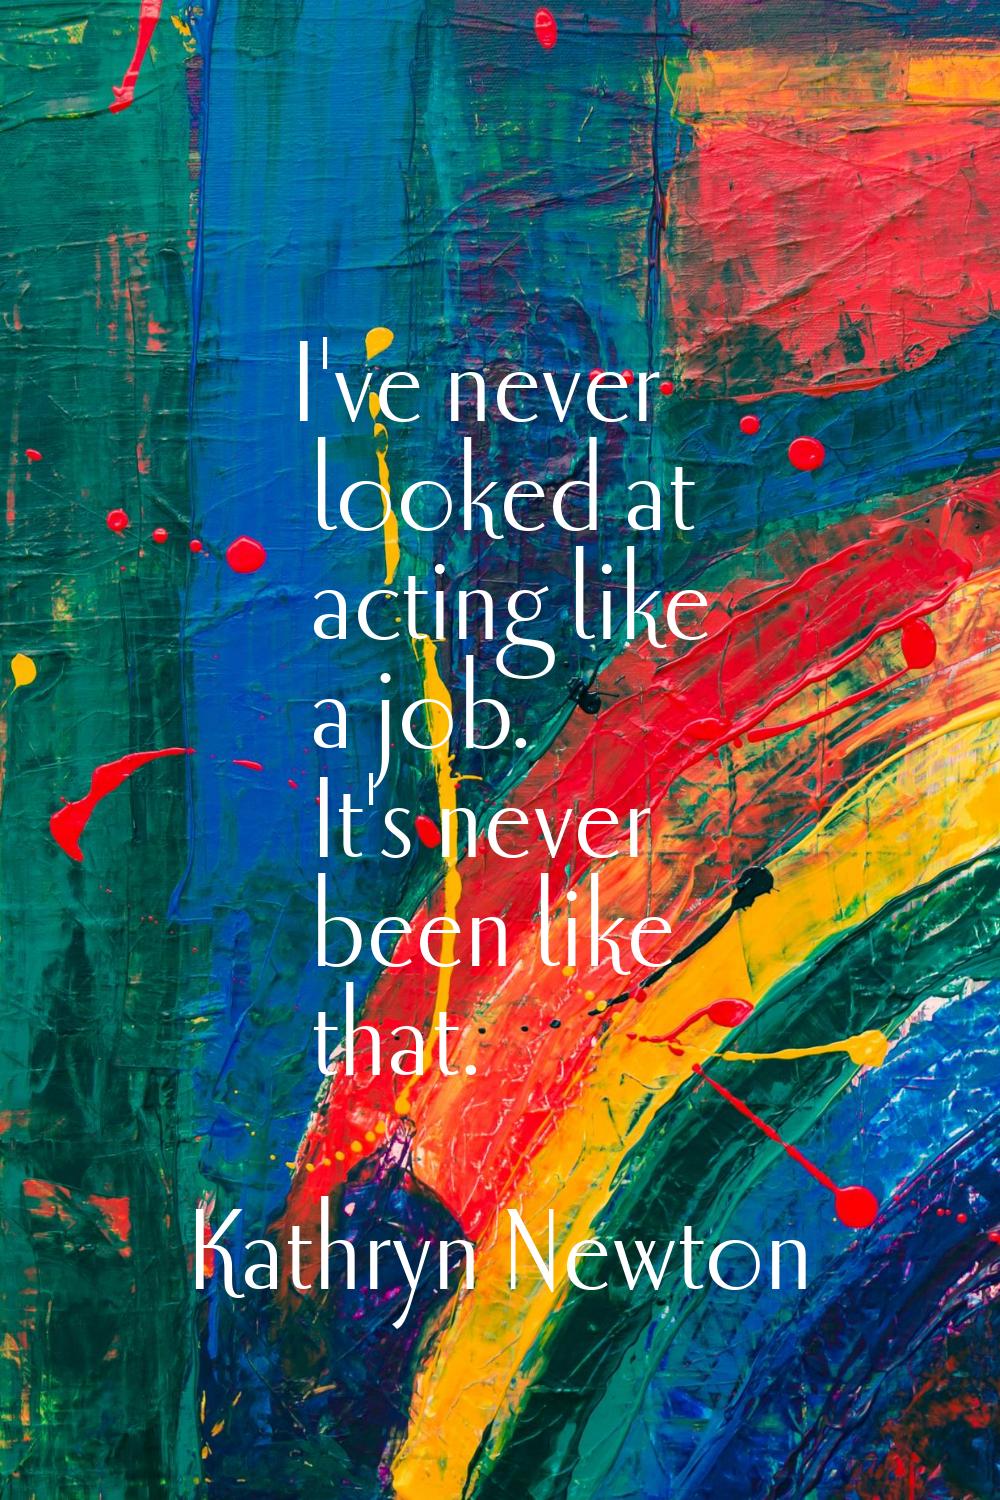 I've never looked at acting like a job. It's never been like that.